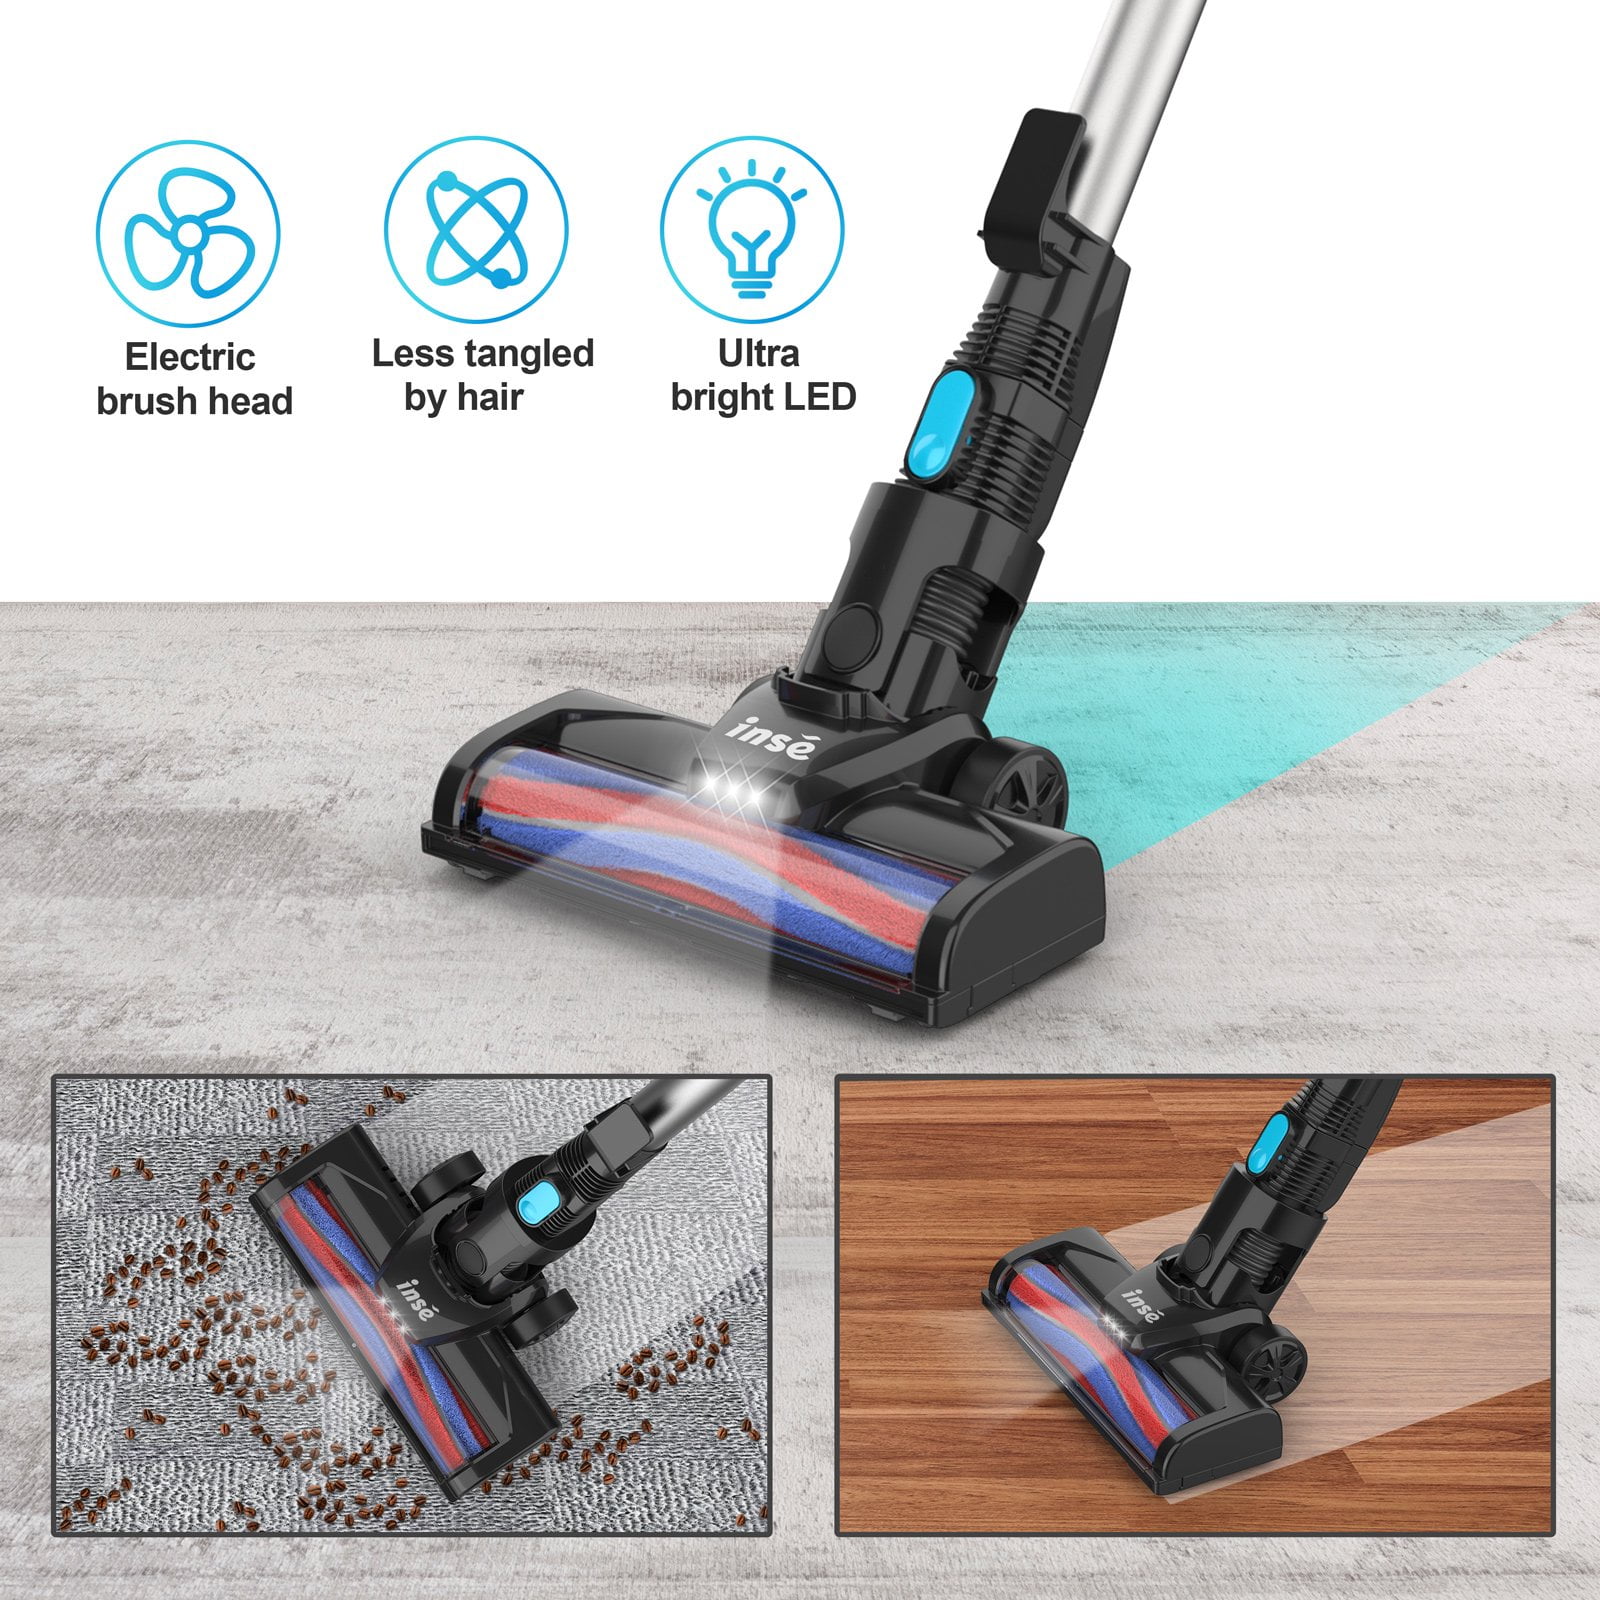 INSE N500 Cordless Vacuum Cleaner, 6 in 1 Rechargeable Powerful Lightweight Stick Vacuum with 2200 mAh Battery for Home Hard Floor Carpet Pet Hair - Light Blue - 1